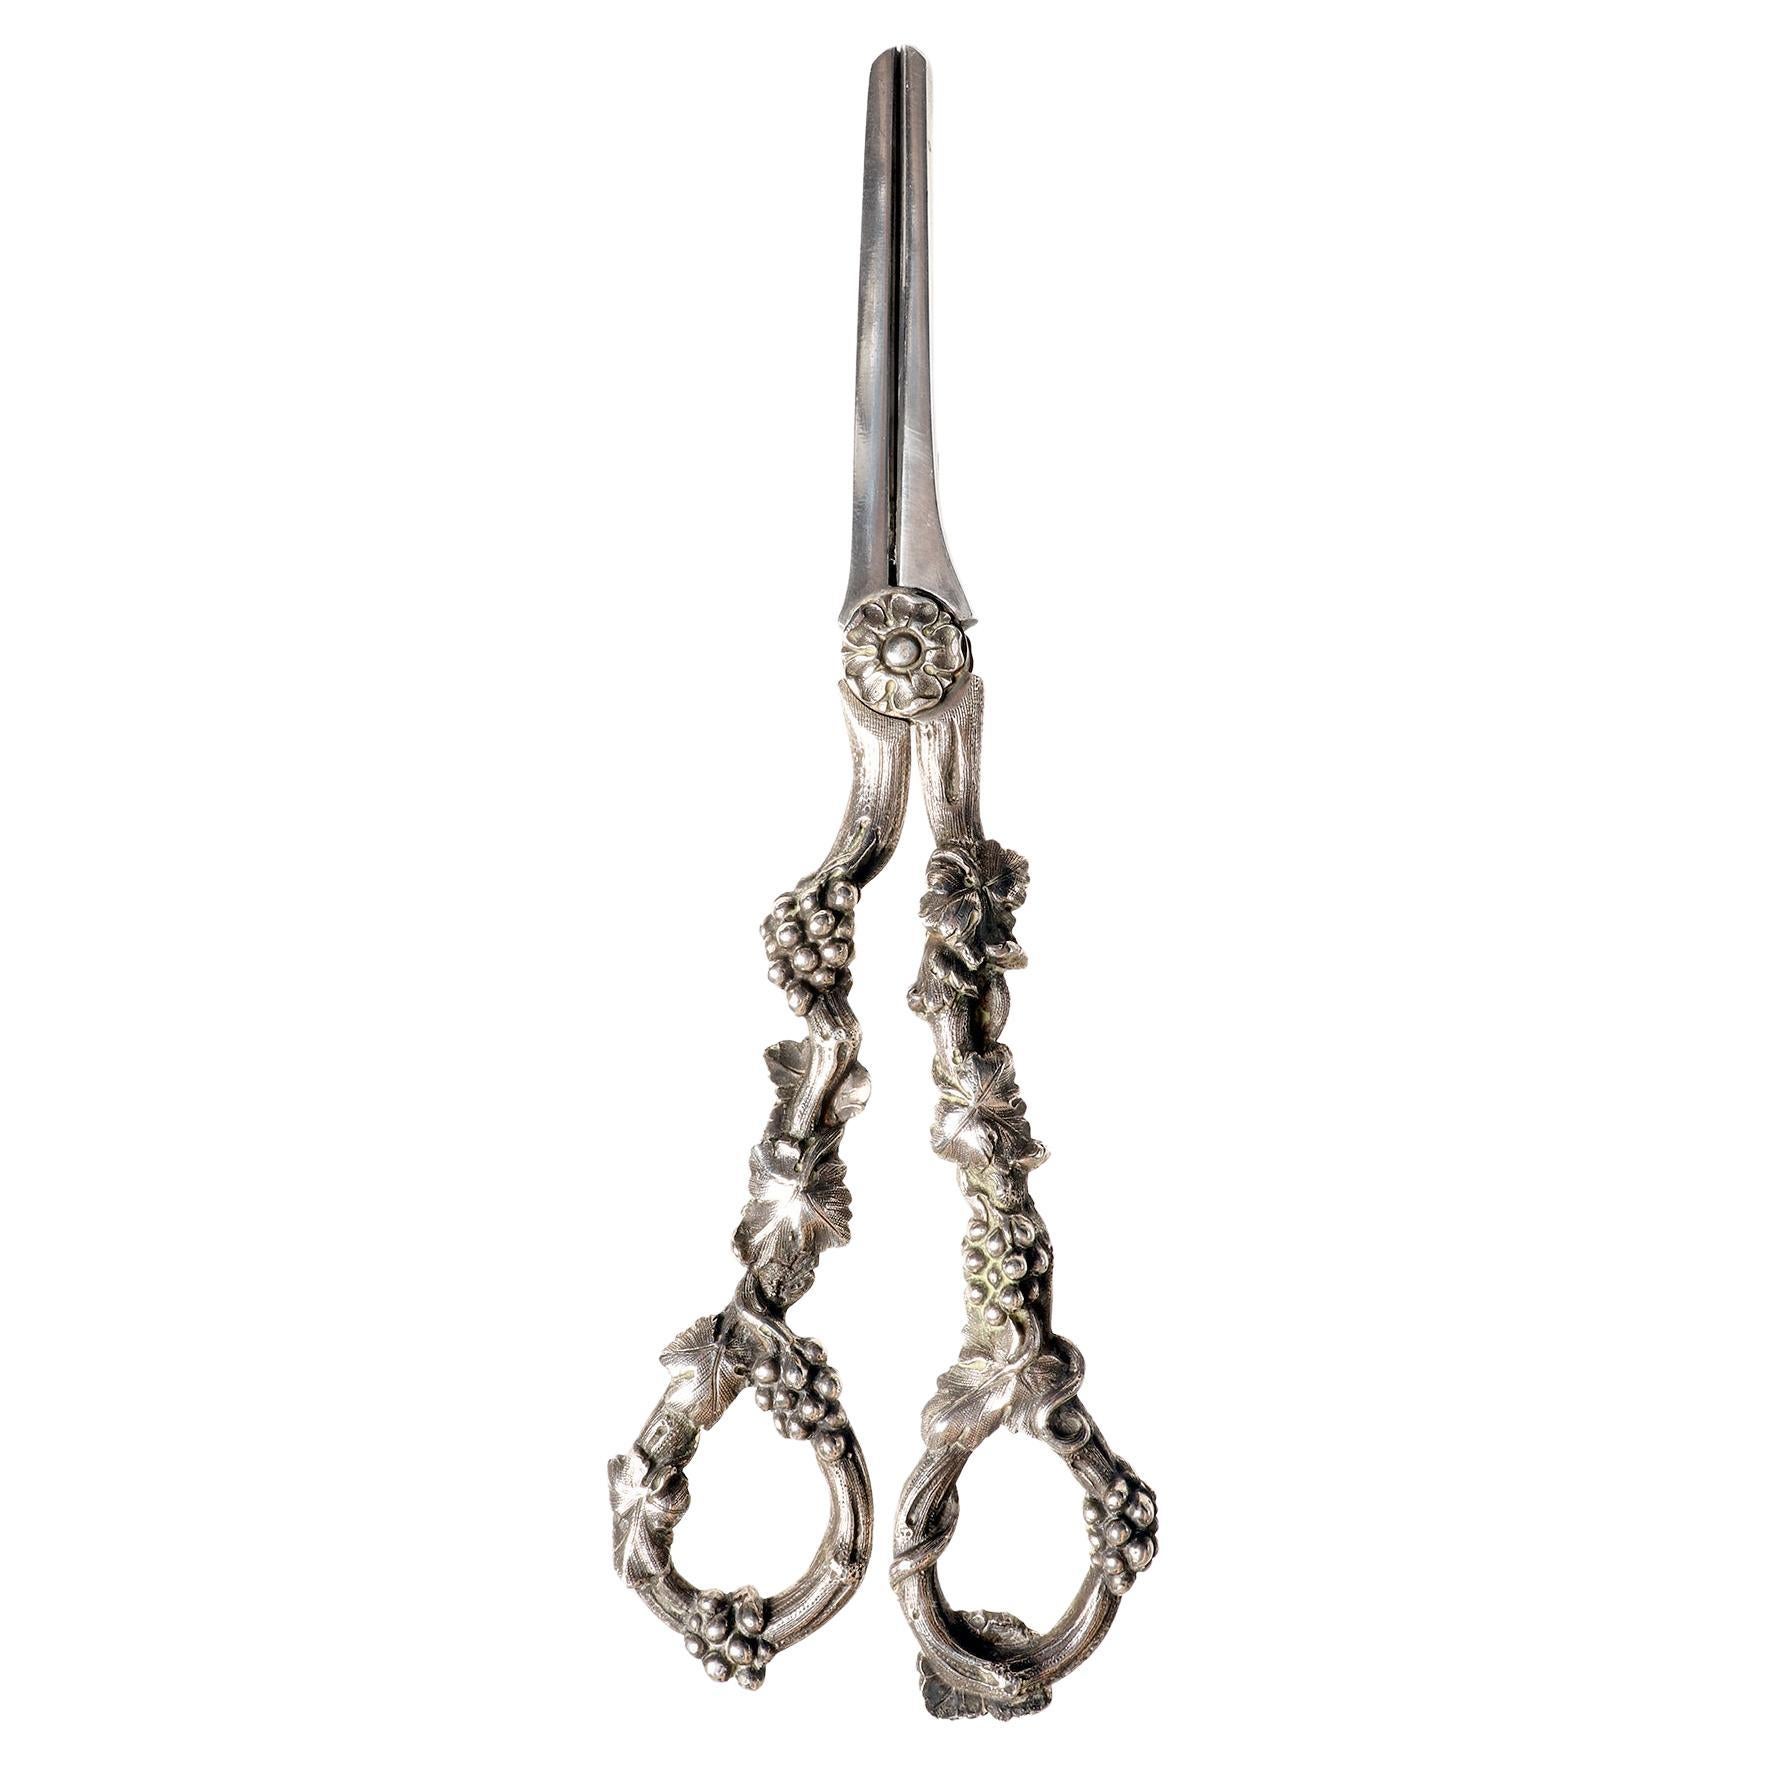 Sterling Silver Scissors to Cut the Stems of the Bunches of Grapes, USA 1860